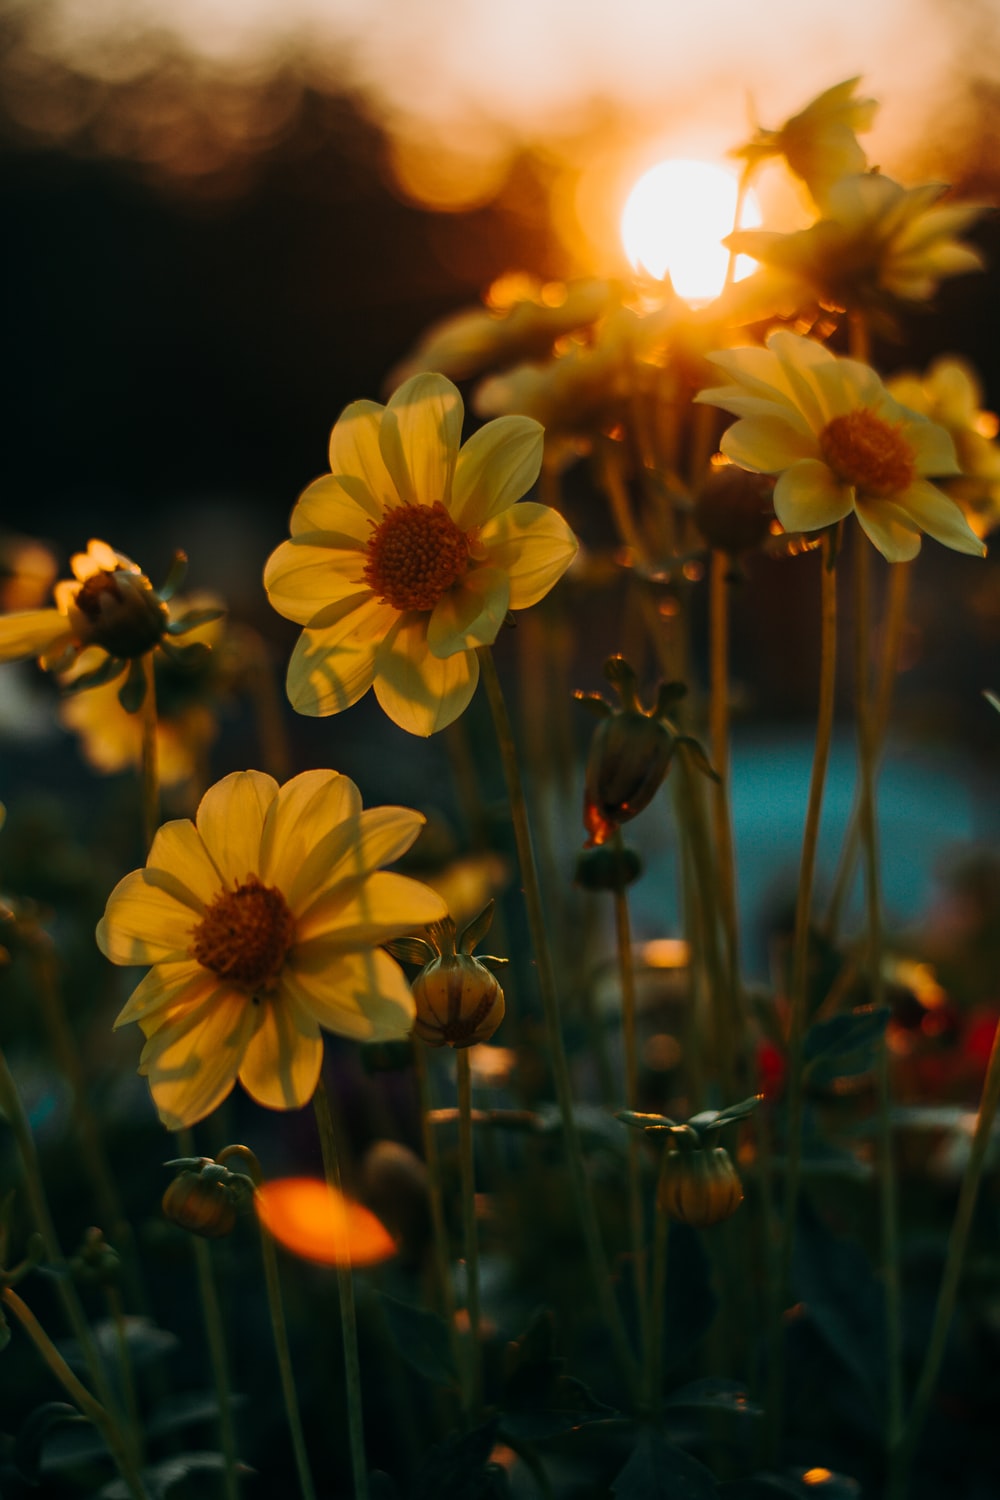 Sunset Flower Picture. Download Free Image